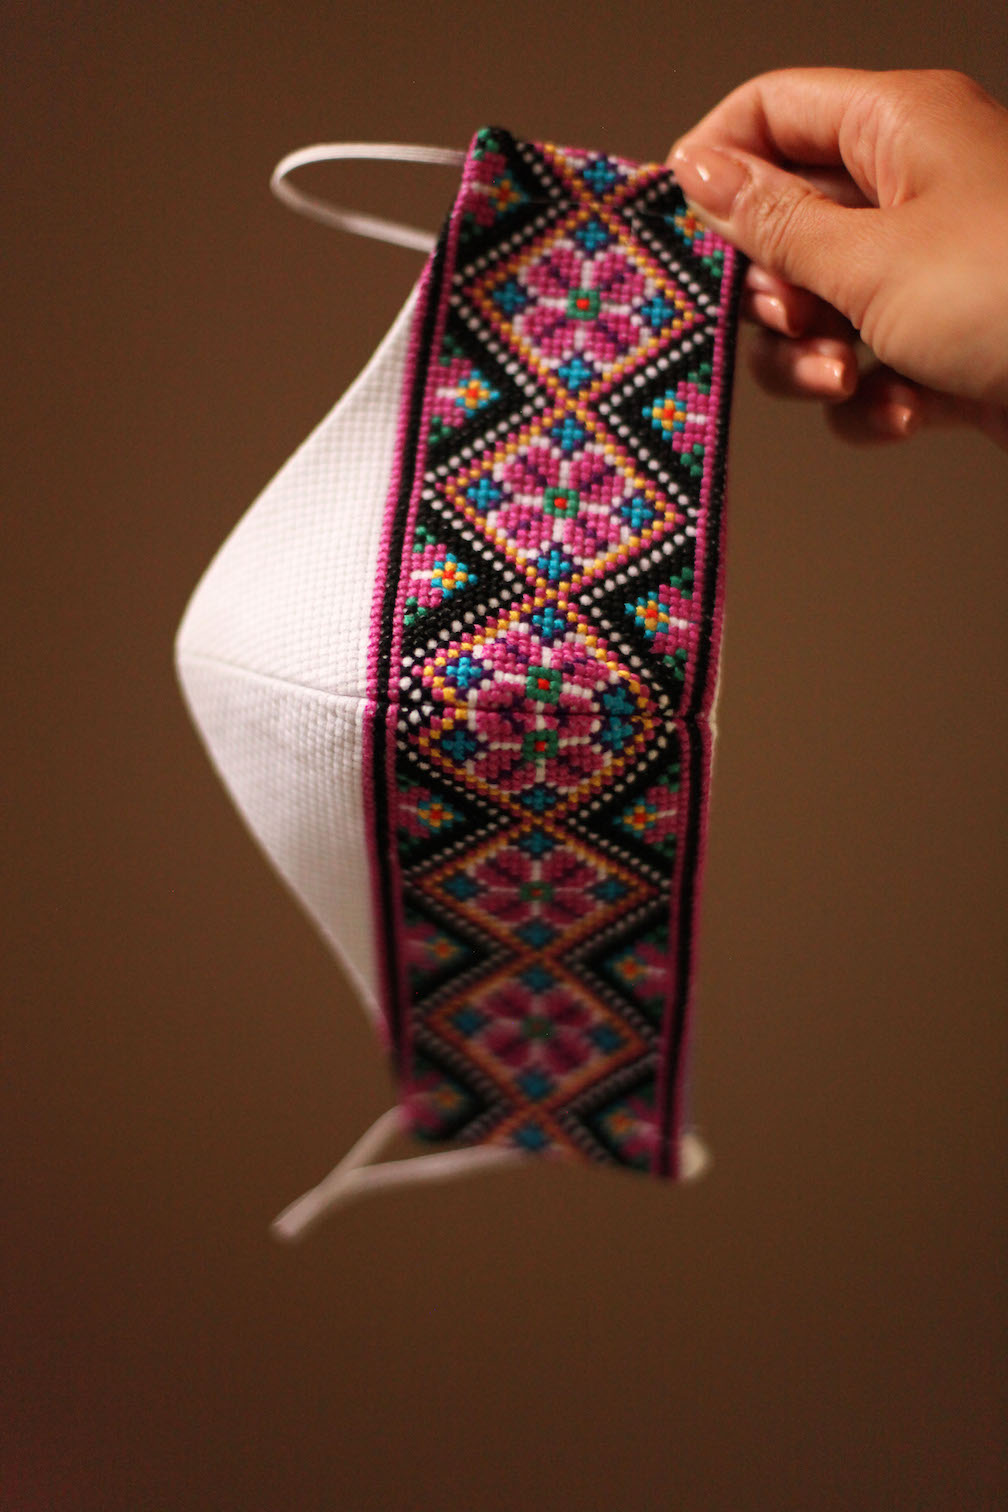 Ukrainian embroidered face covering